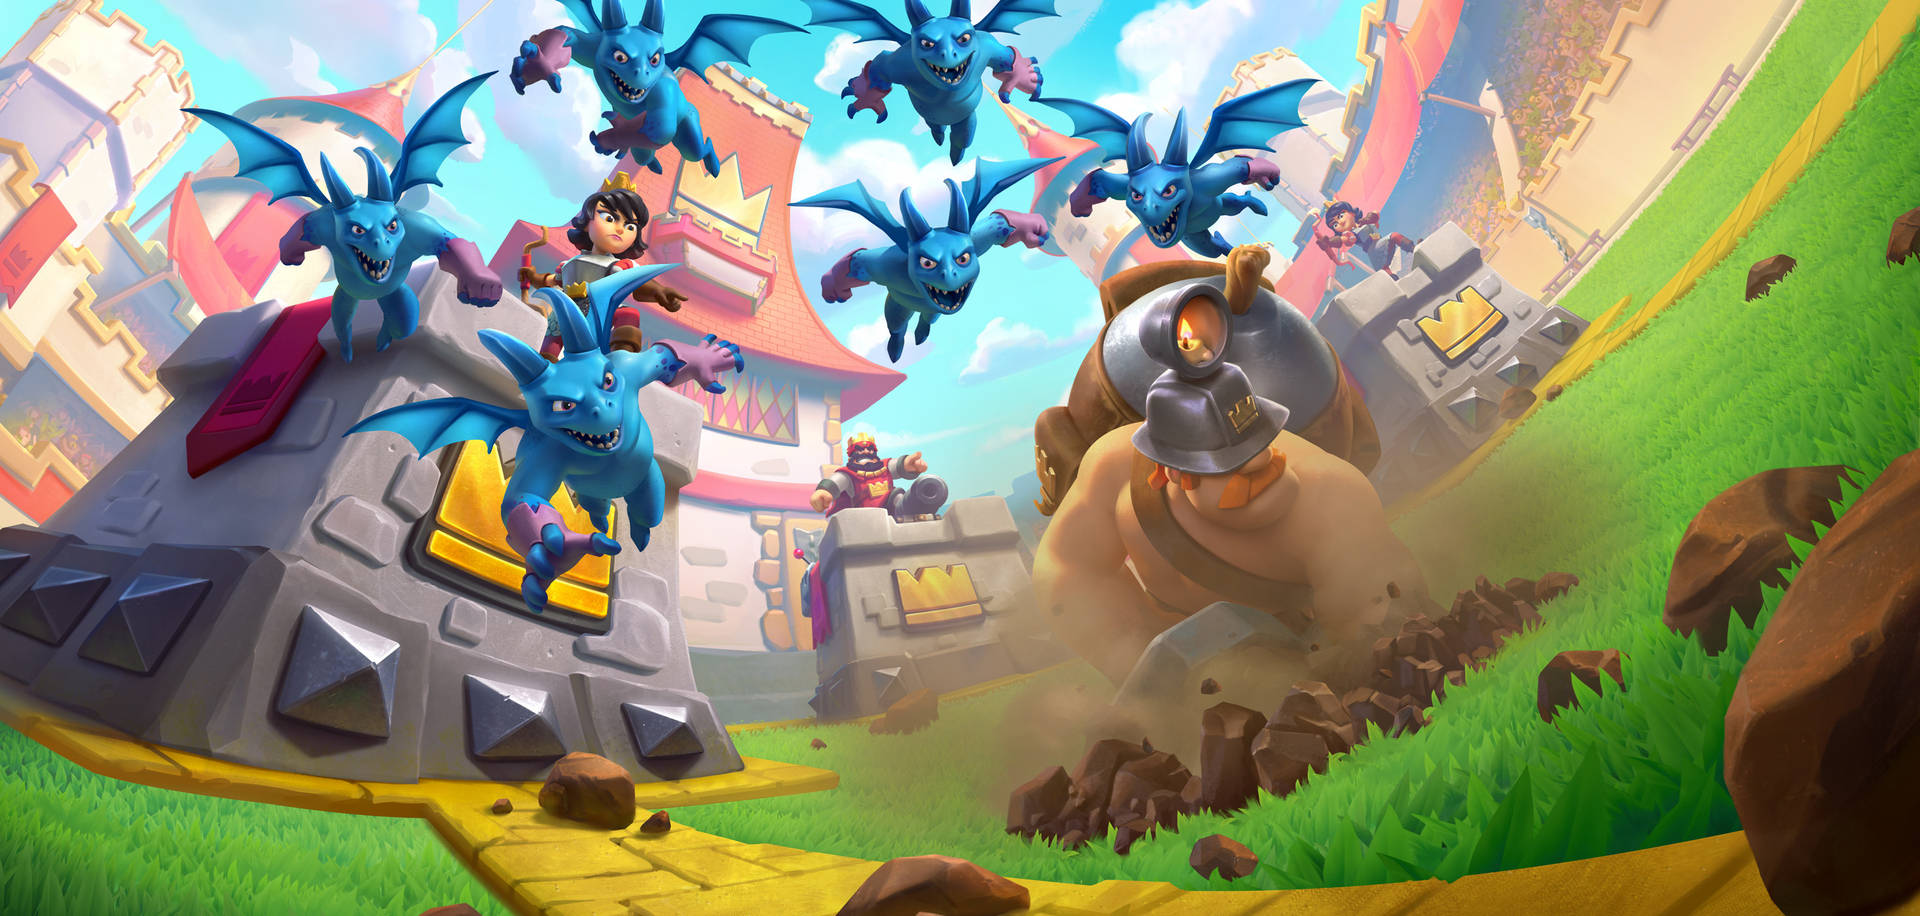 Wallpaper Of Minions And The Mighty Miner From The Clash Royale Phone Game